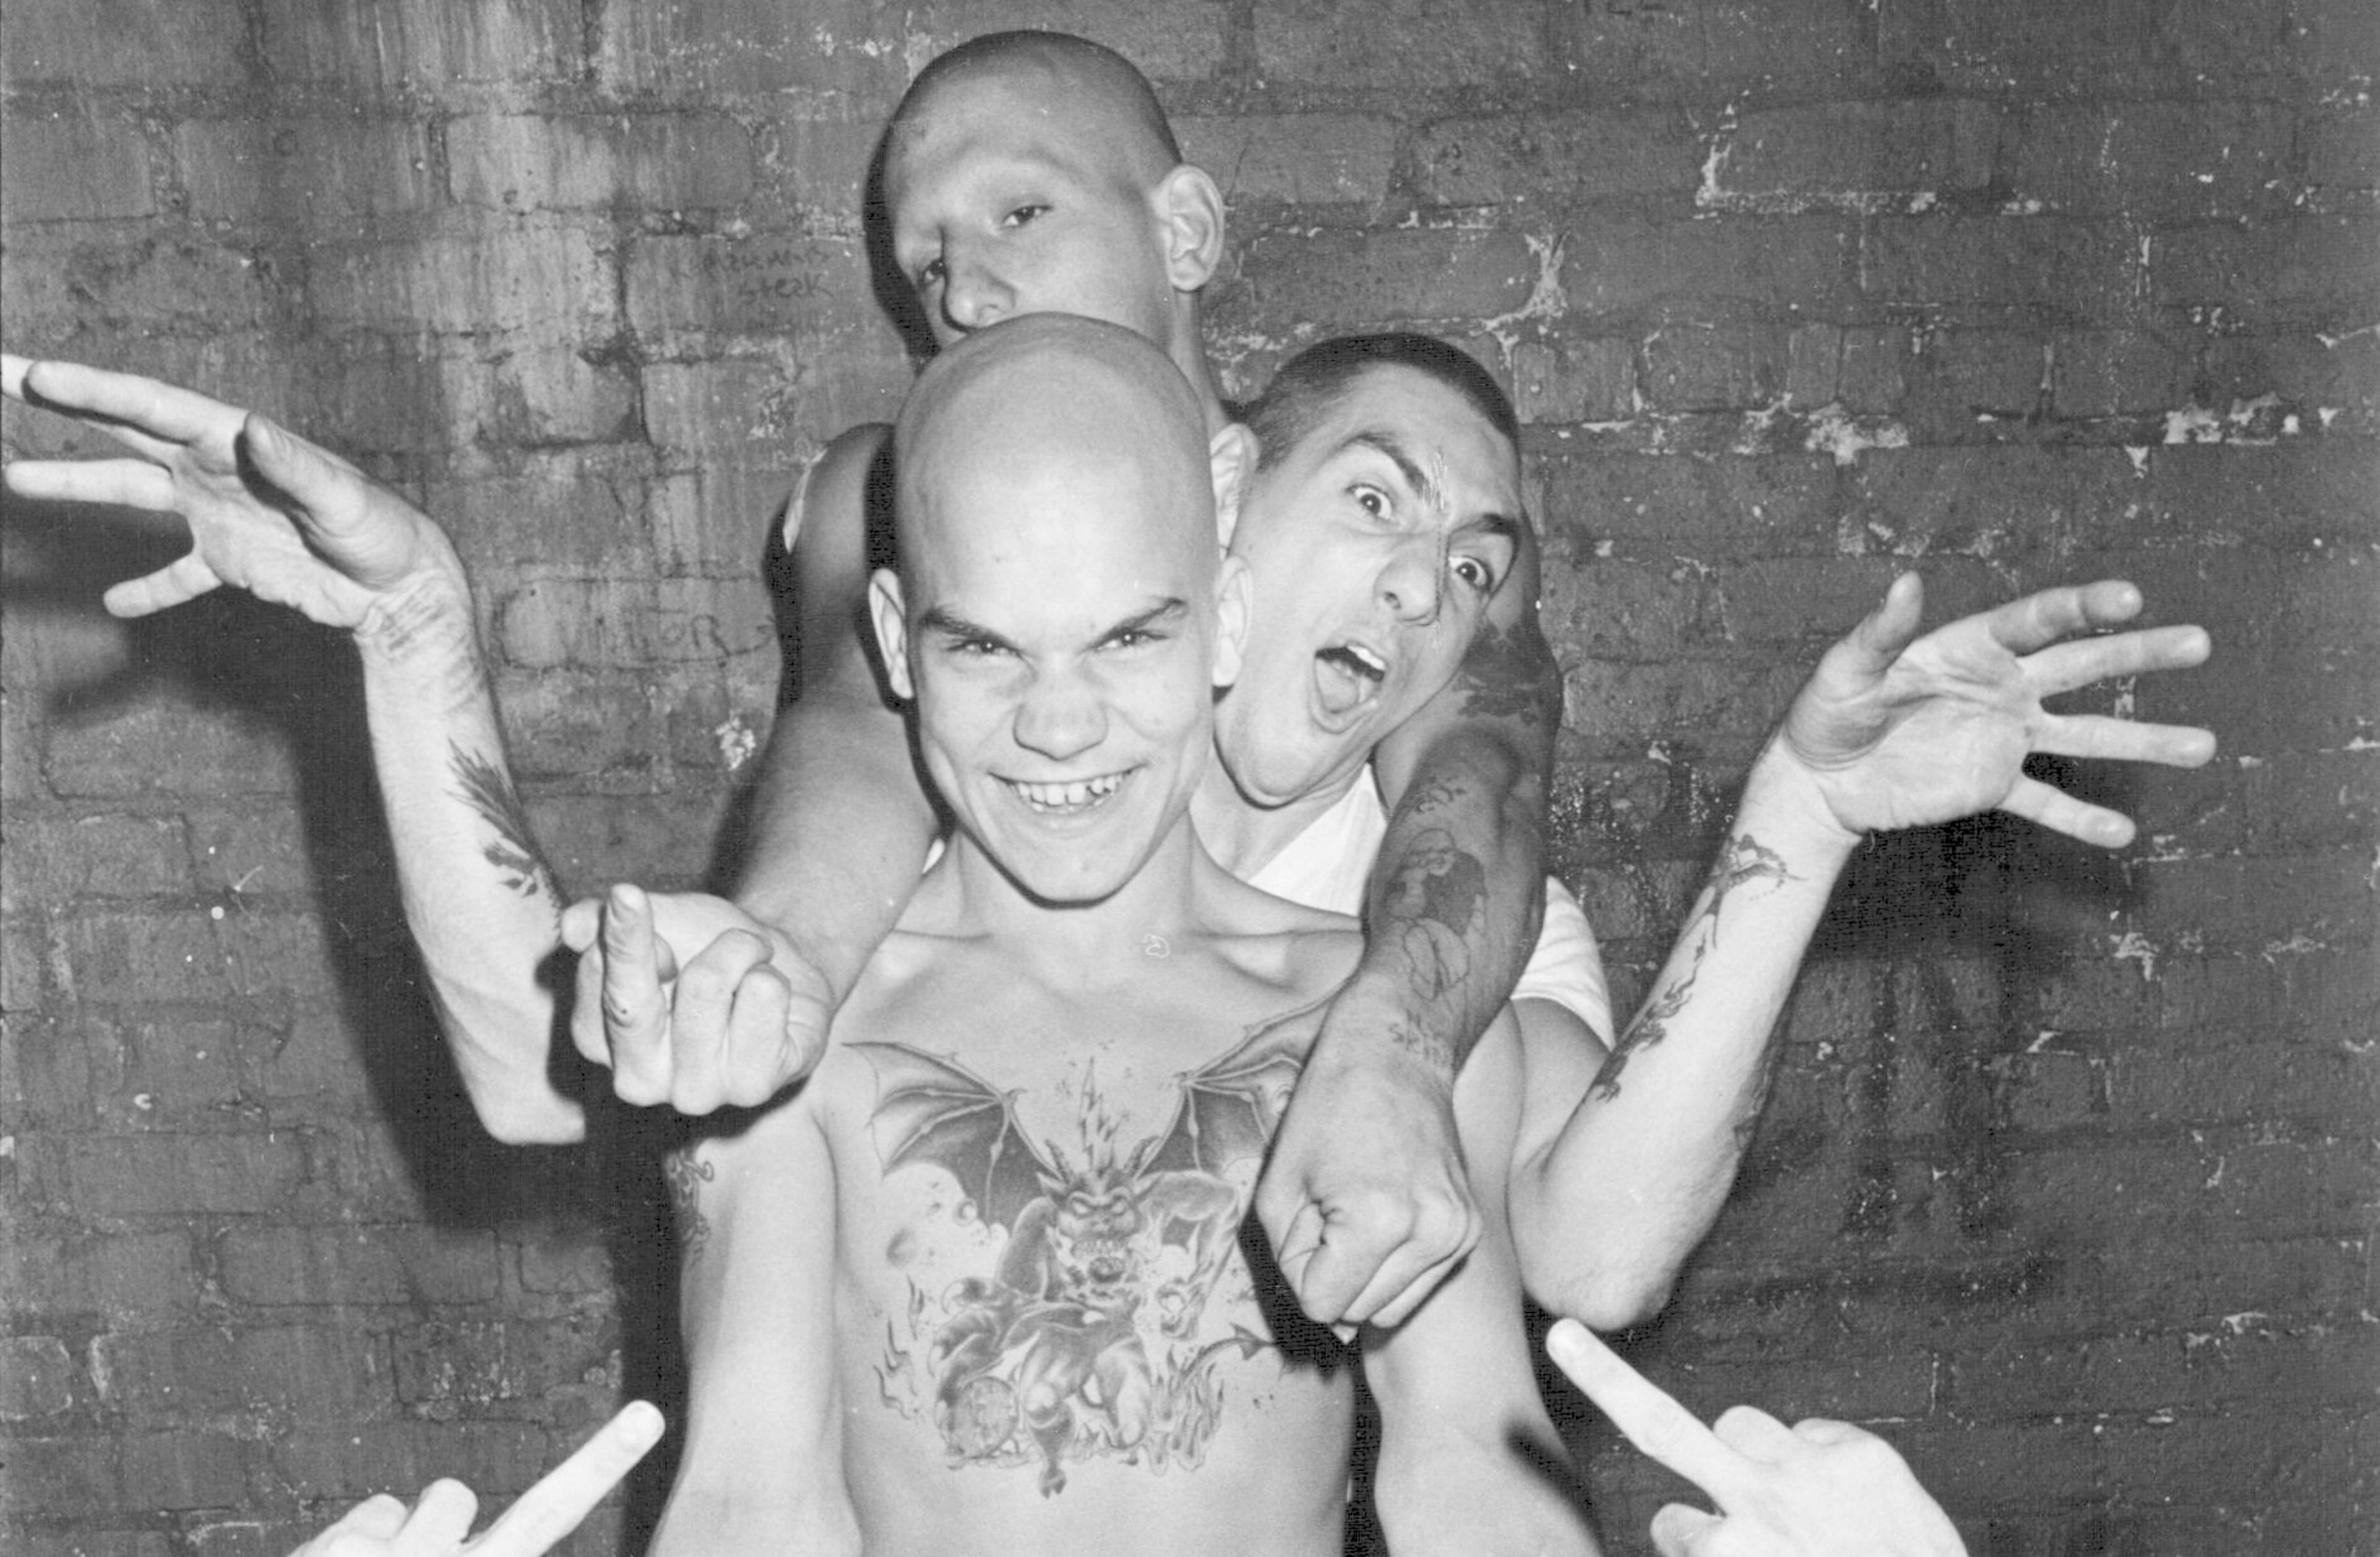 Cro-Mags Reach Legal Settlement, Will Perform As Two Bands